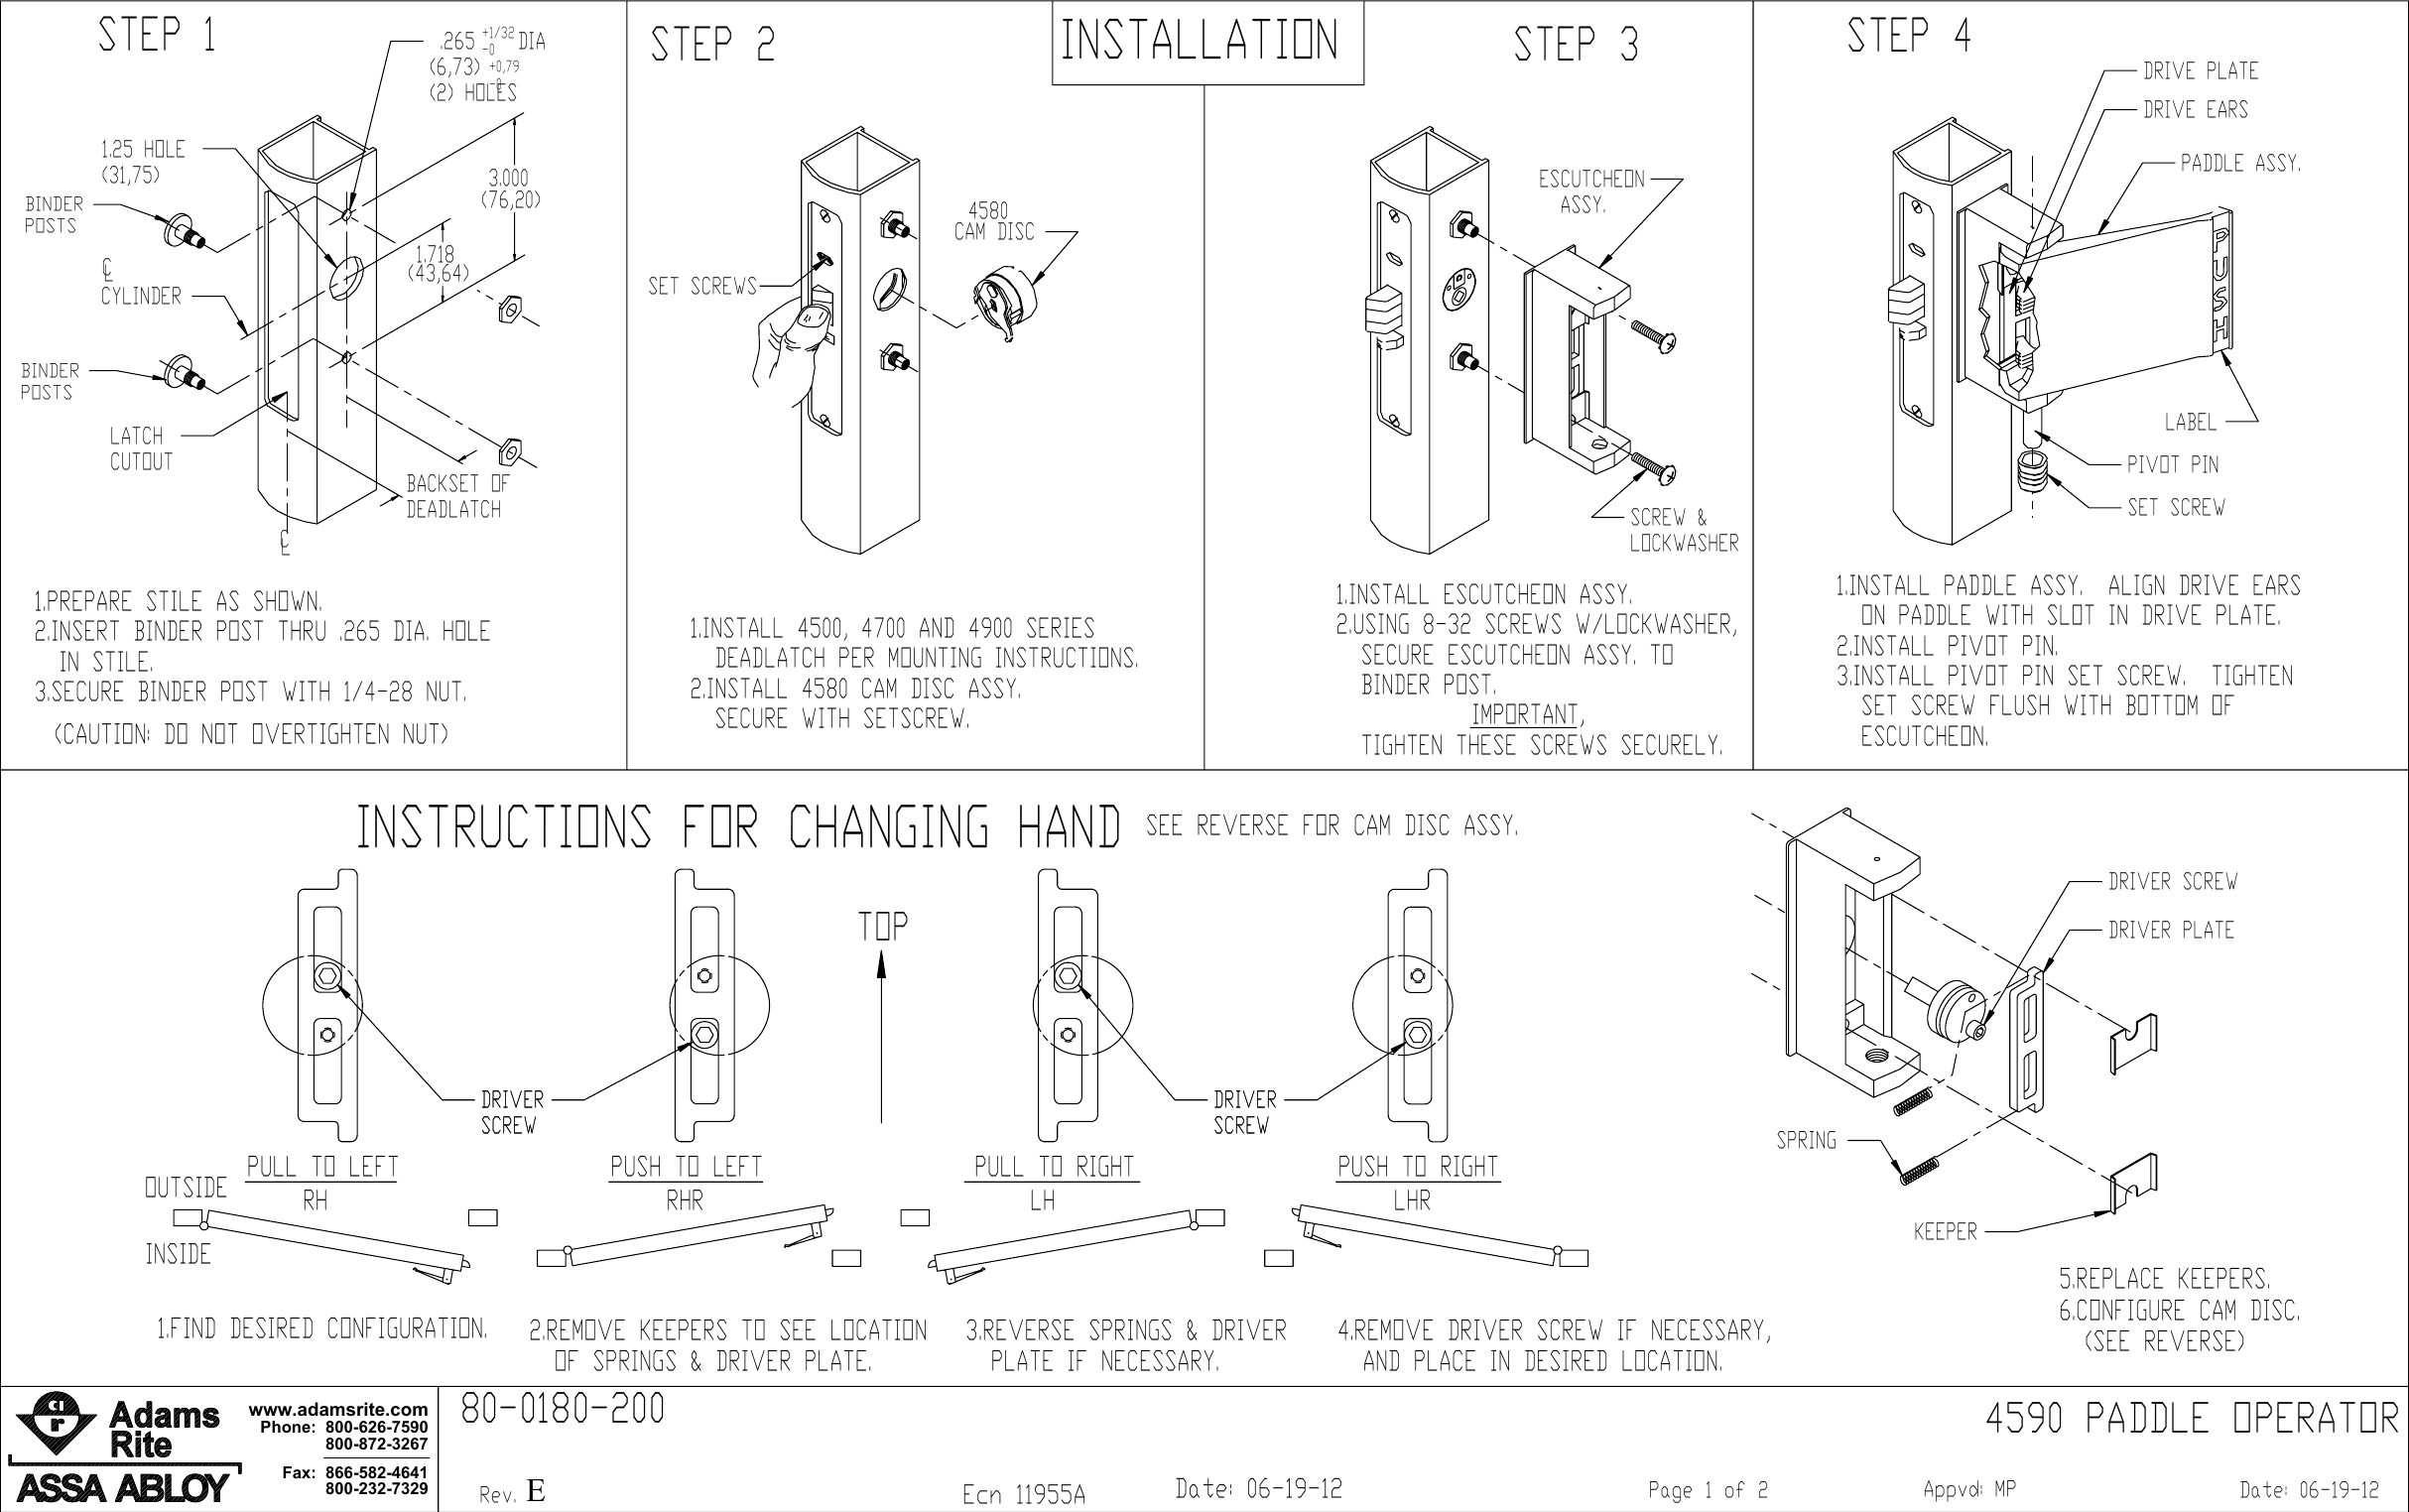 Page 1 of 2 - Adams Rite 80-0180-200_E 4590, 4591 Deadlatch Paddles Installation Instructions 4590 80-0180-200 E